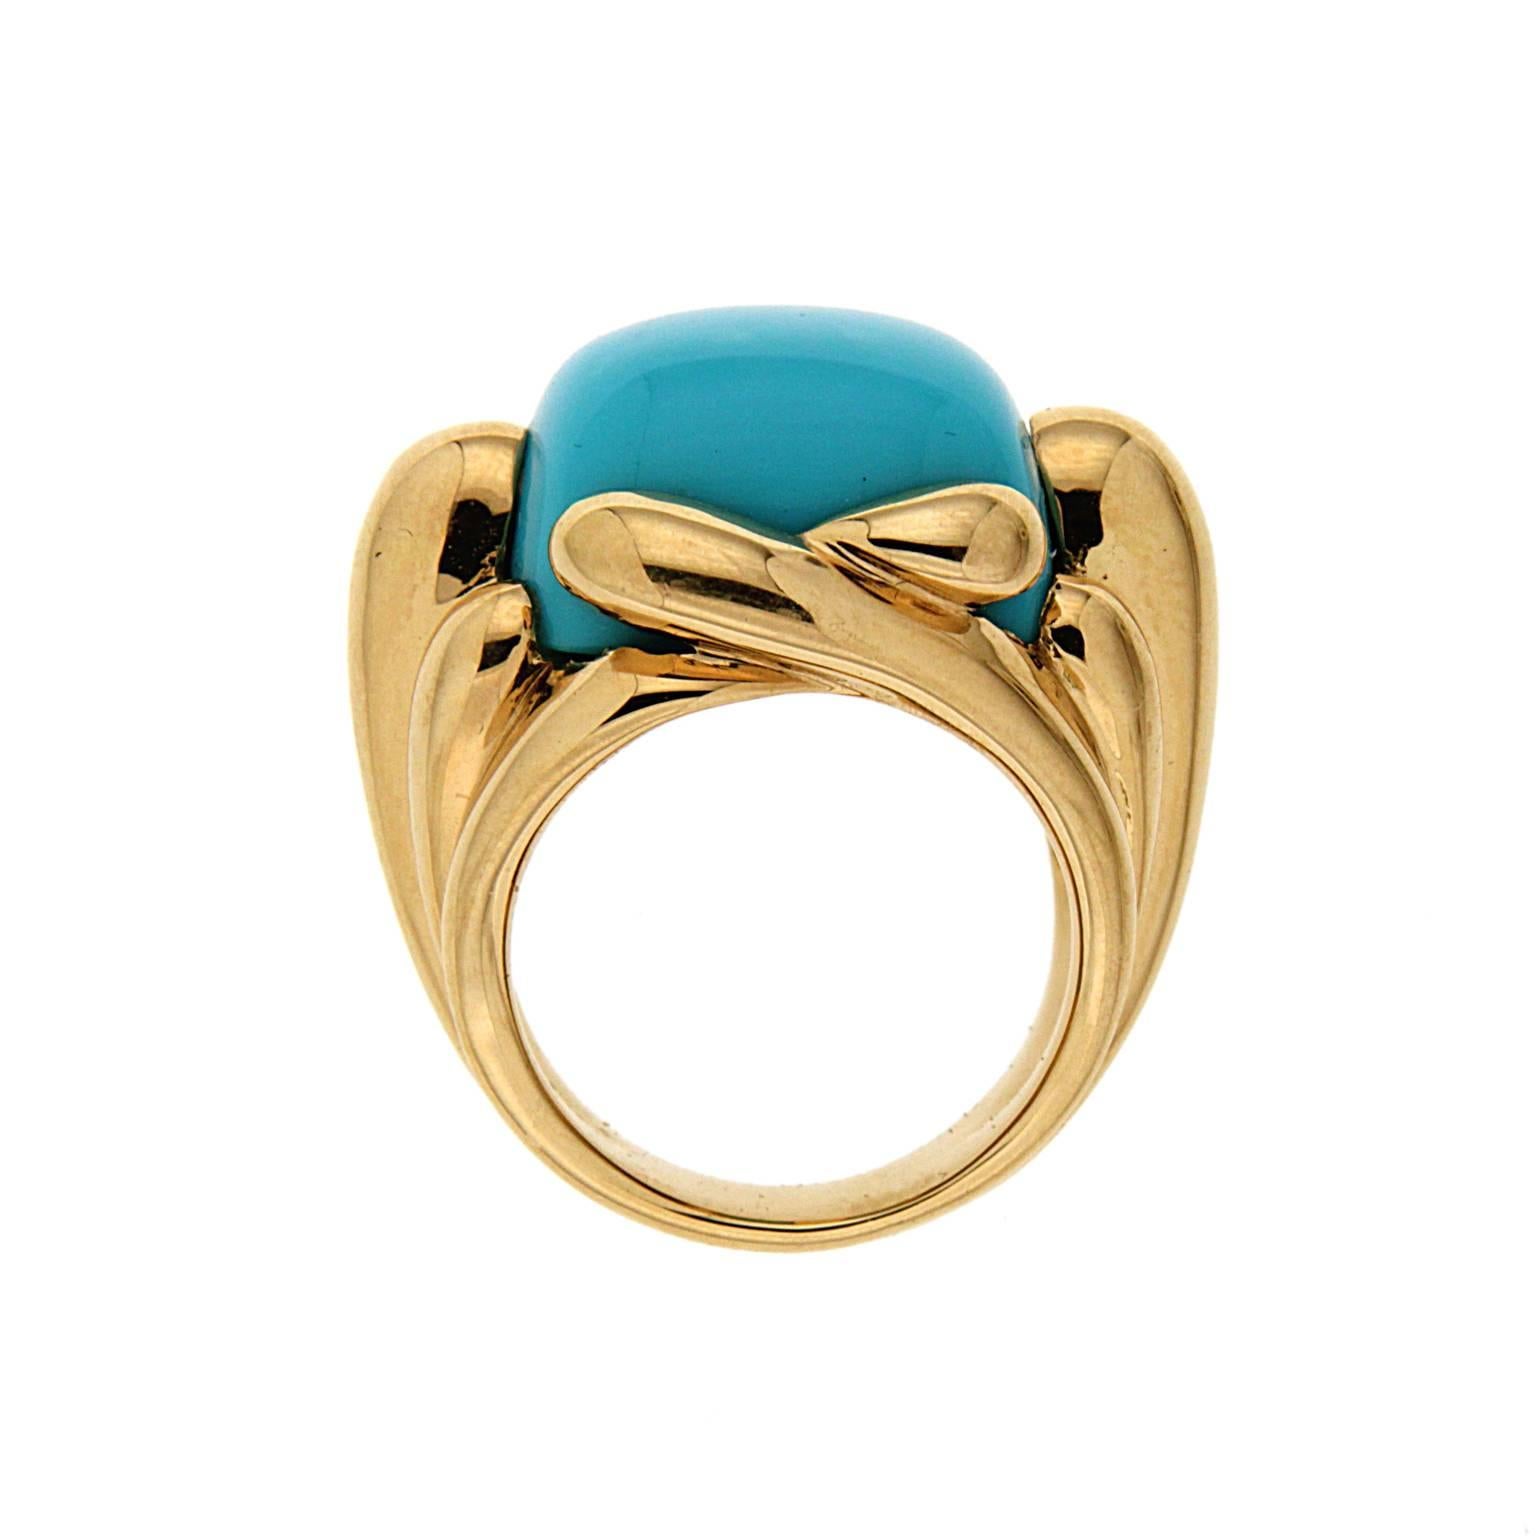 This ring is made in 18kt yellow gold, it features a cushion cabochon turquoise center which measures 16.5x13.65mm. 